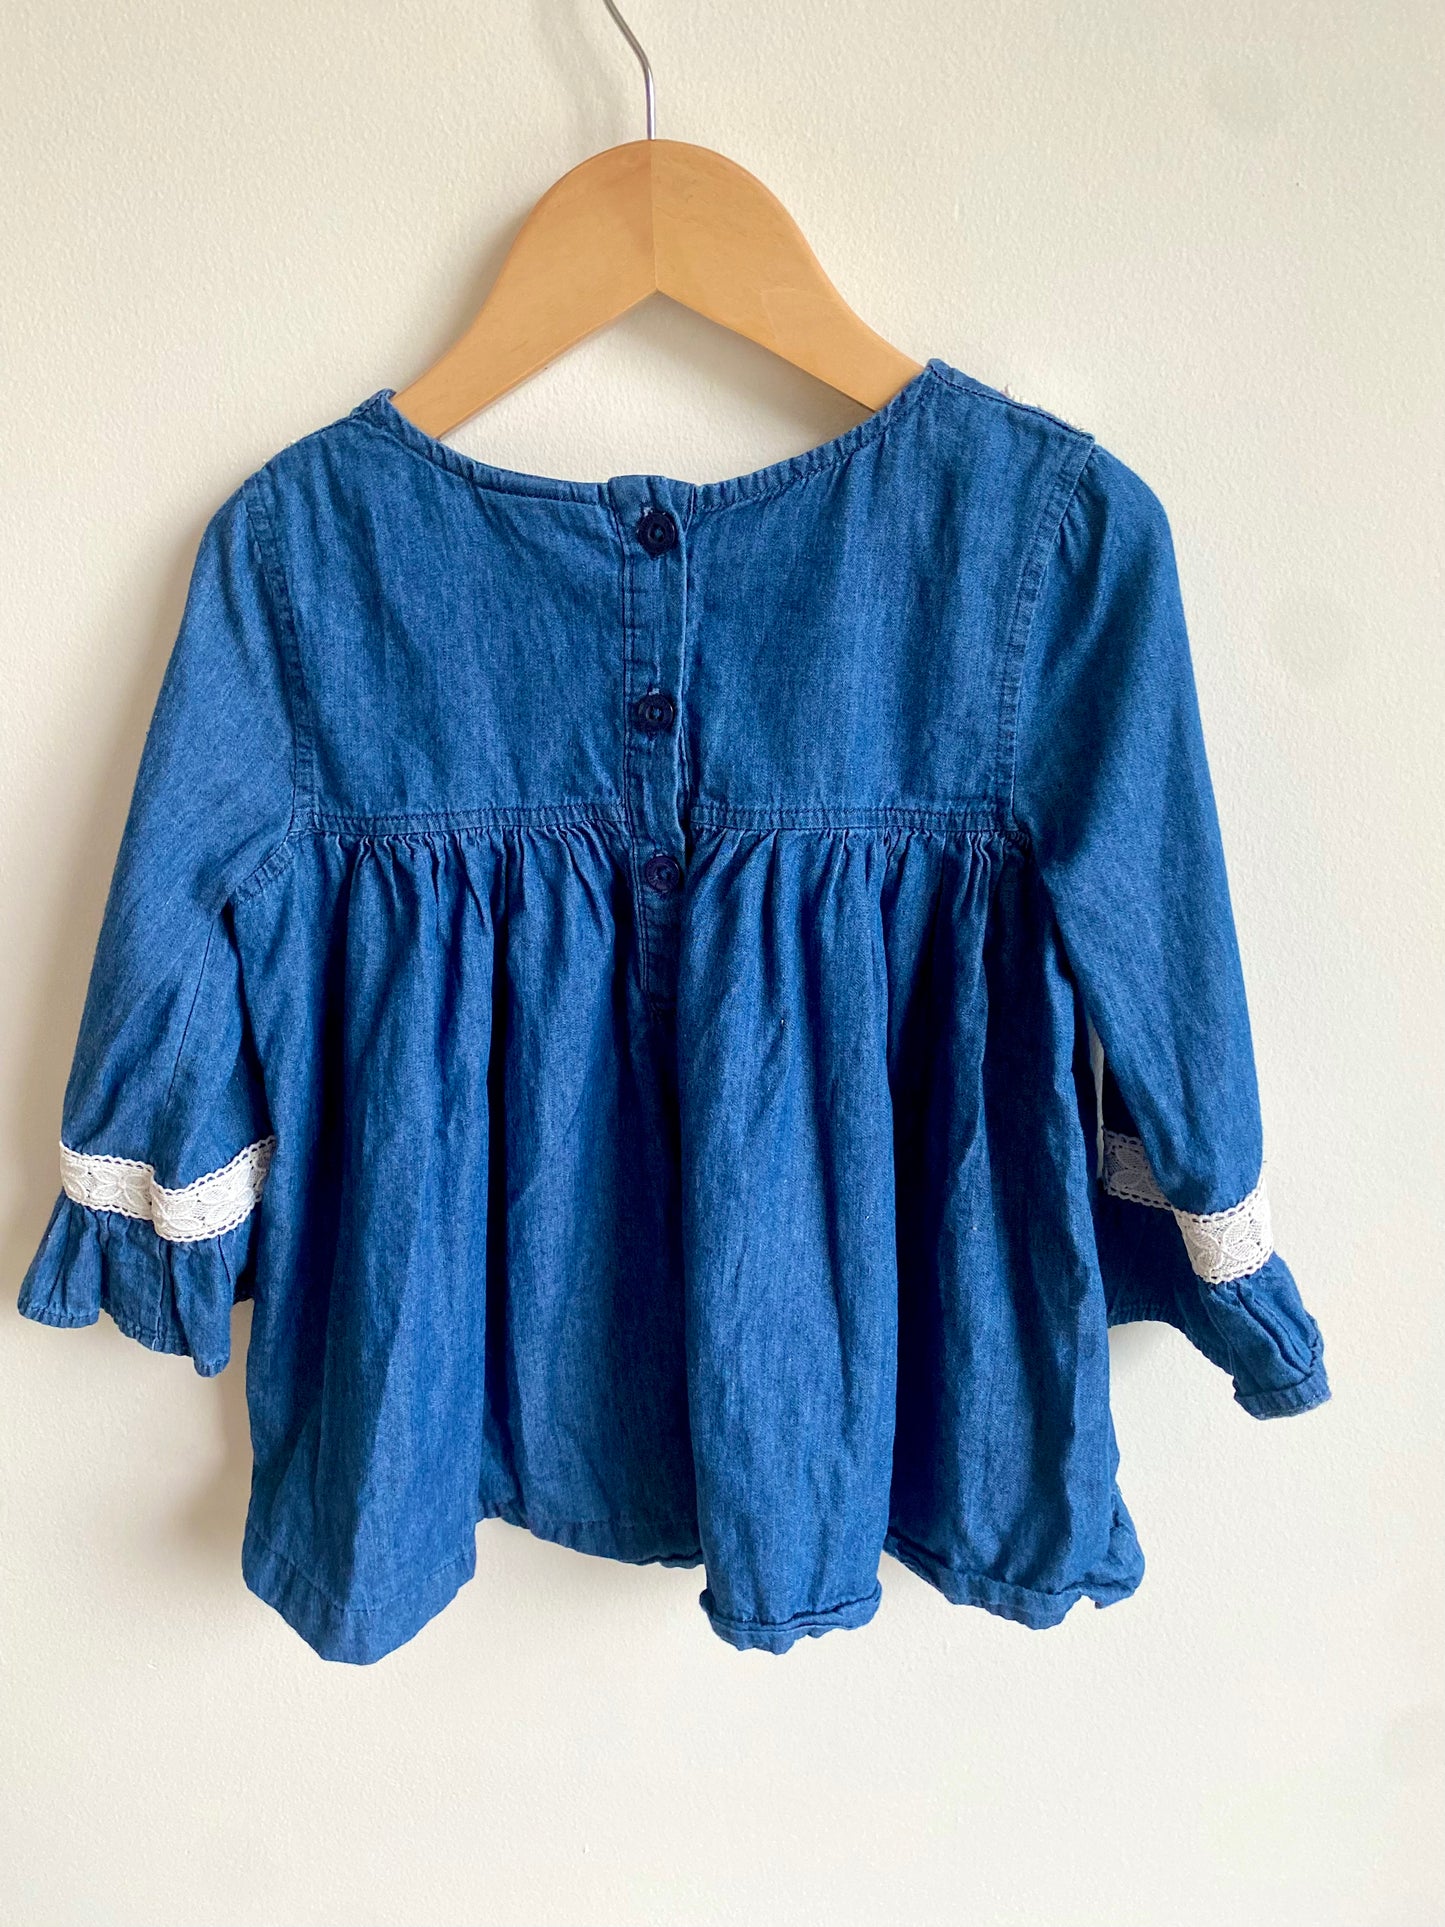 Jean Top with Lace Details / 5T